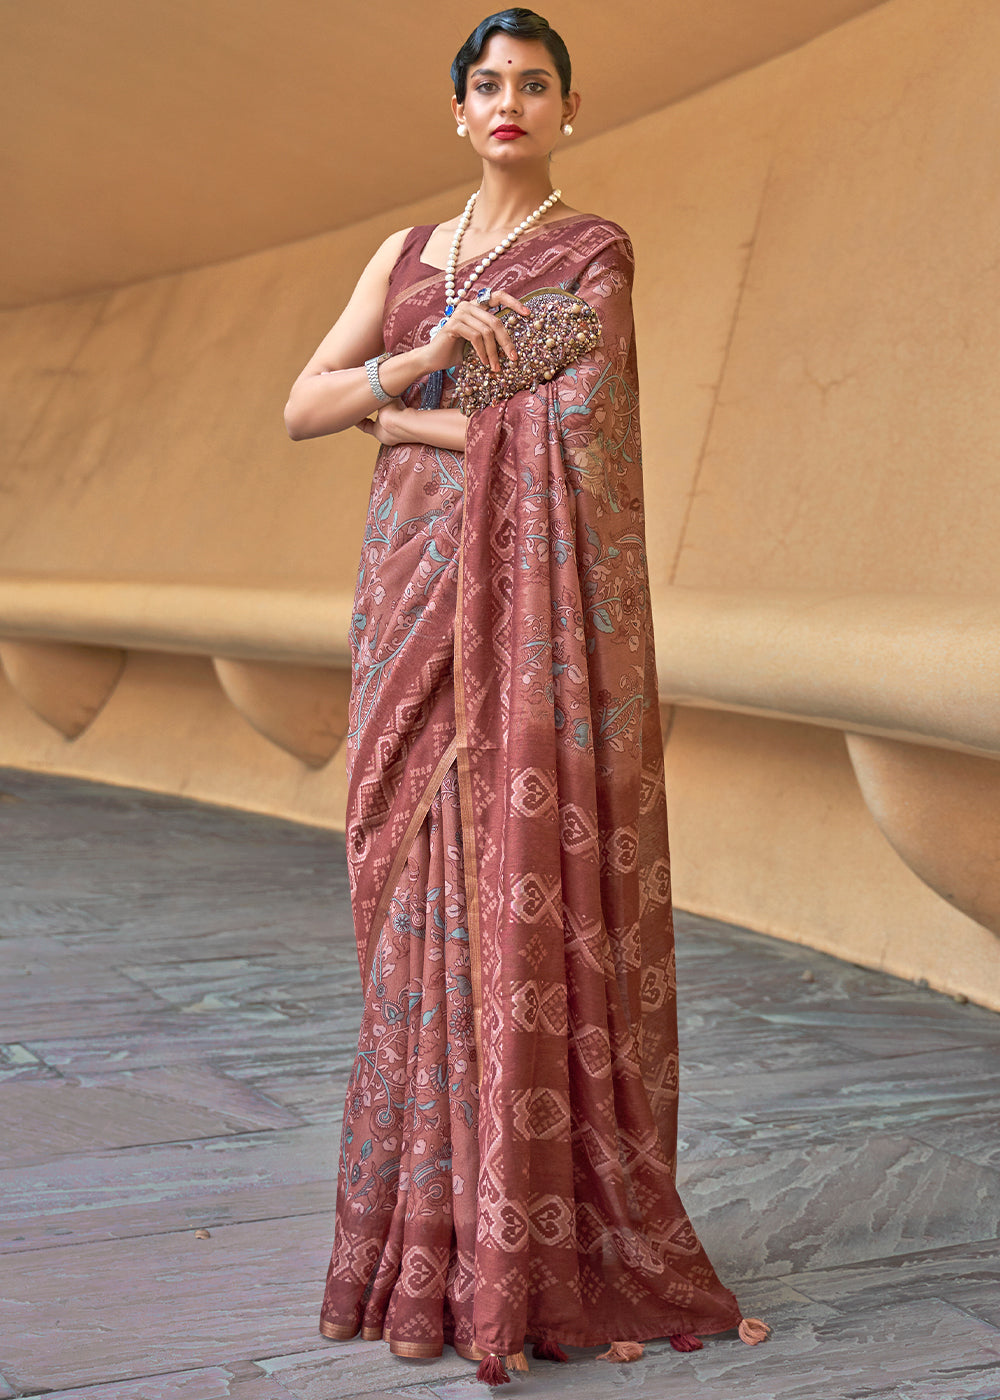 Buy MySilkLove Copper Penny Brown Floral Printed Cotton Saree Online